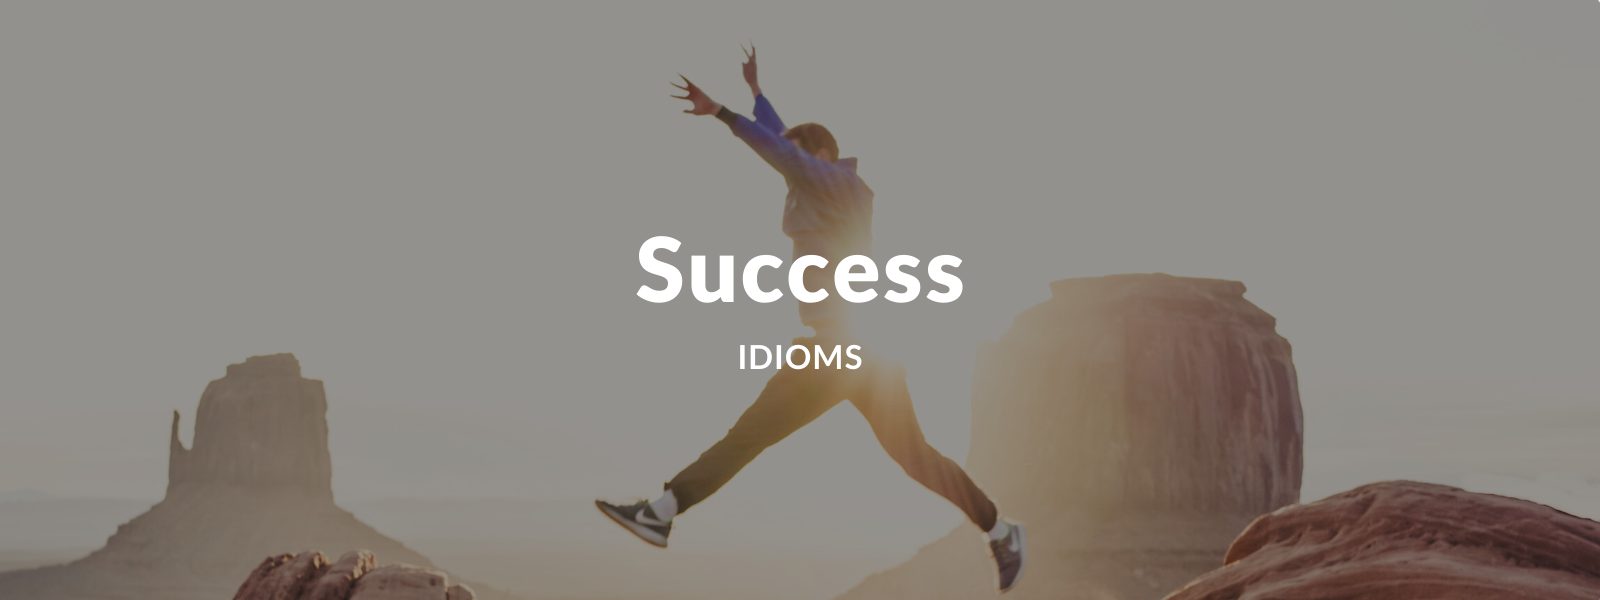 12 Perfect Success Idioms To Show Off At Work